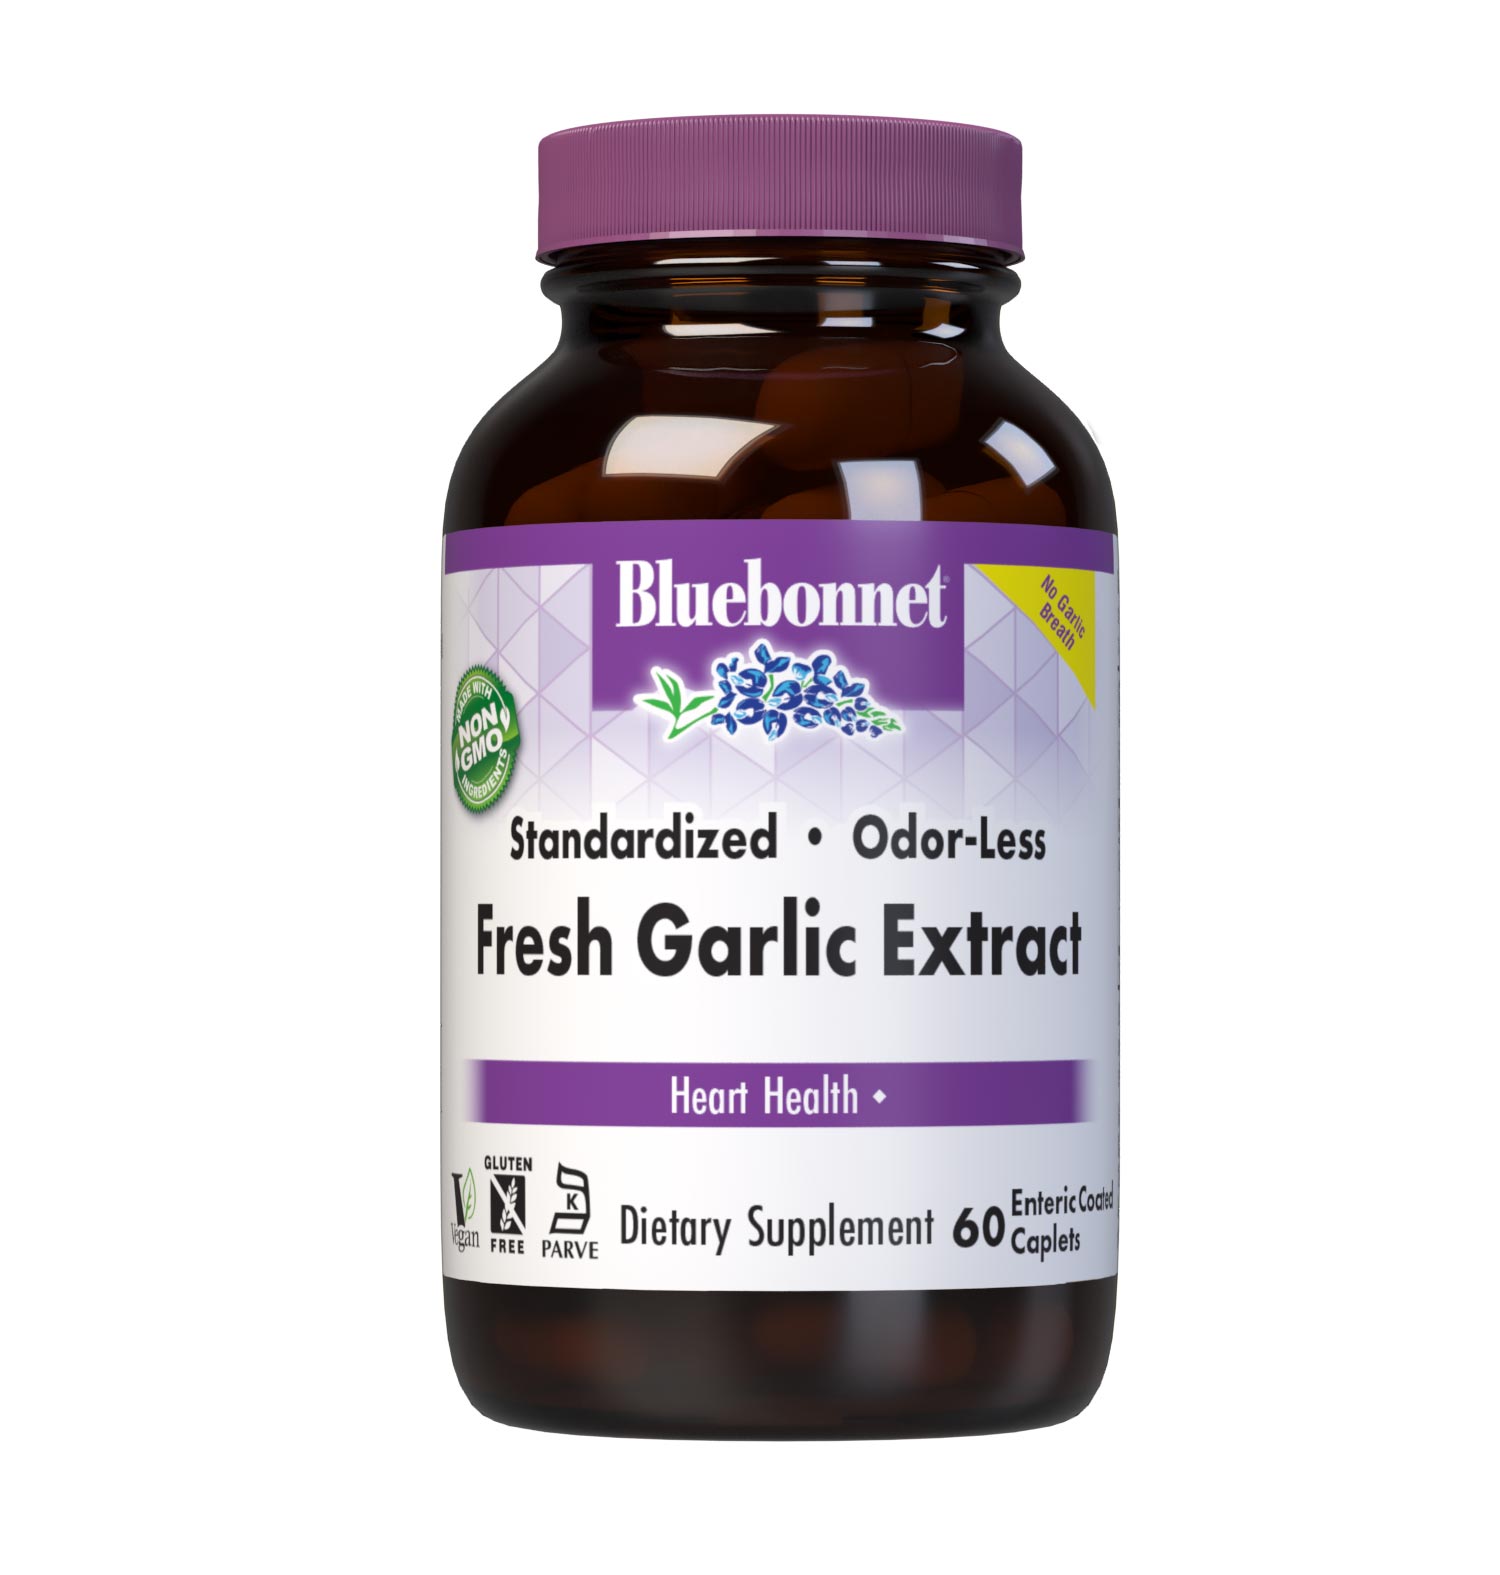 Bluebonnet’s Standardized Odor-Less Fresh Garlic Extract 60 Enteric Coated Caplets are formulated with fresh garlic extract from non-GMO garlic bulb and are standardized to yield allicin and allicin precursors, which are converted to allicin when ingested to support heart health. #size_60 count